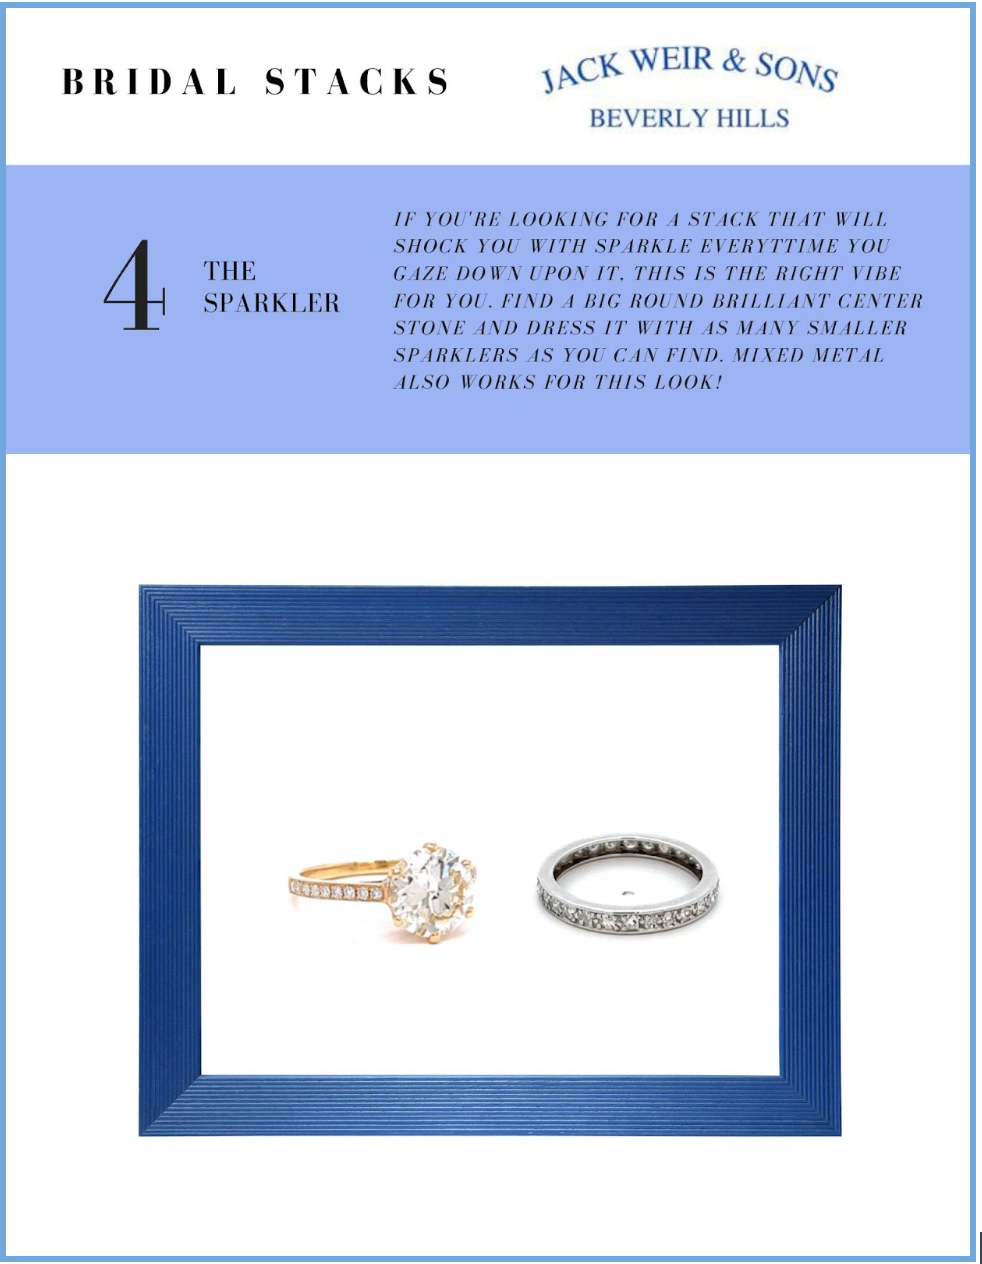 A yellow gold diamond ring on a diamond band and a platinum diamond eternity band sit side by side on white background with copy discussing how to get the most sparkle on your finger!